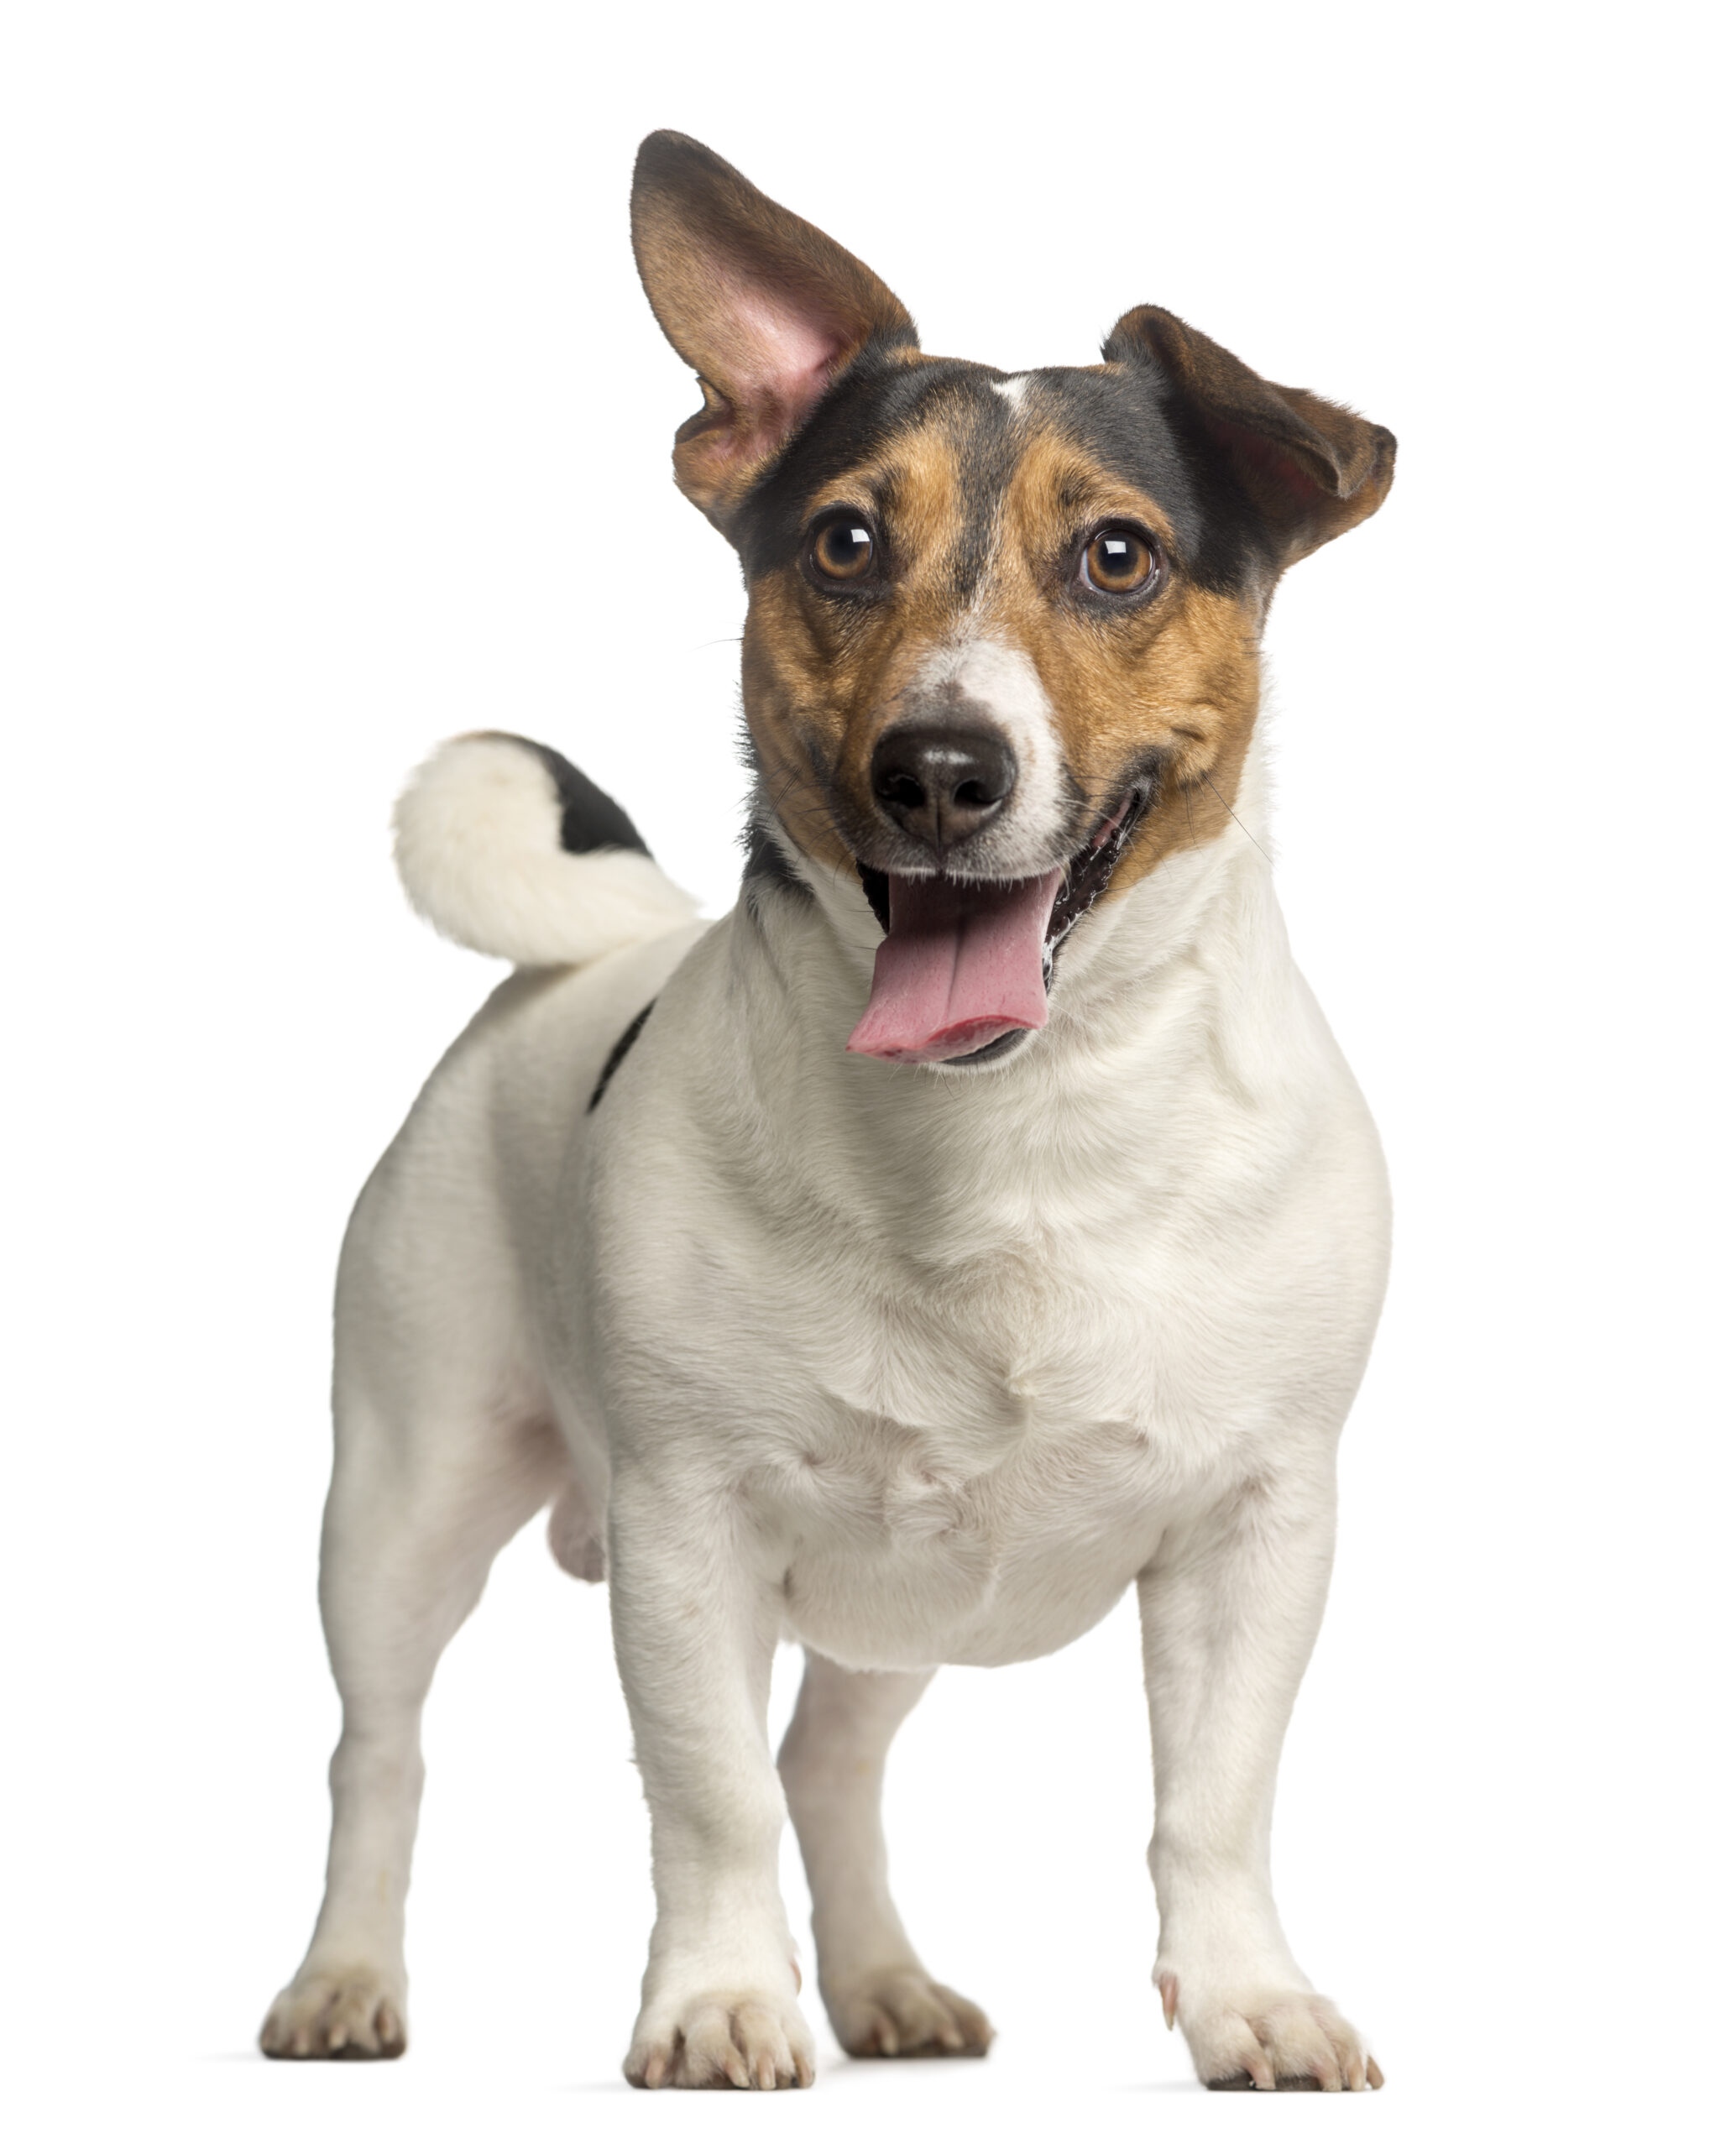 jack-russell-terrier-3-years-old-standing-and-panting-isolated-on-white-3